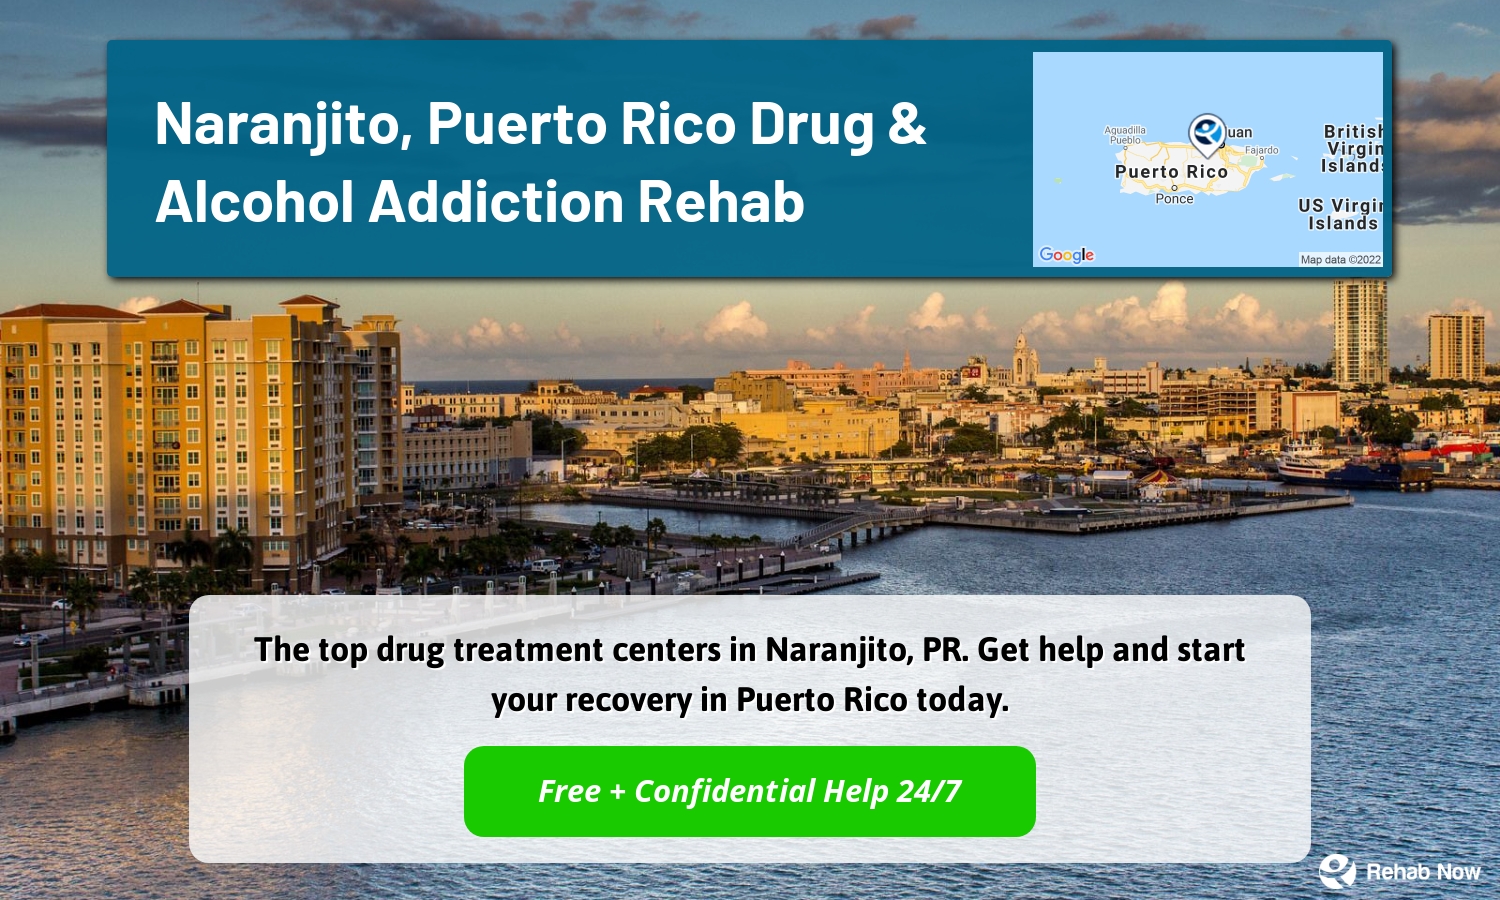 The top drug treatment centers in Naranjito, PR. Get help and start your recovery in Puerto Rico today.